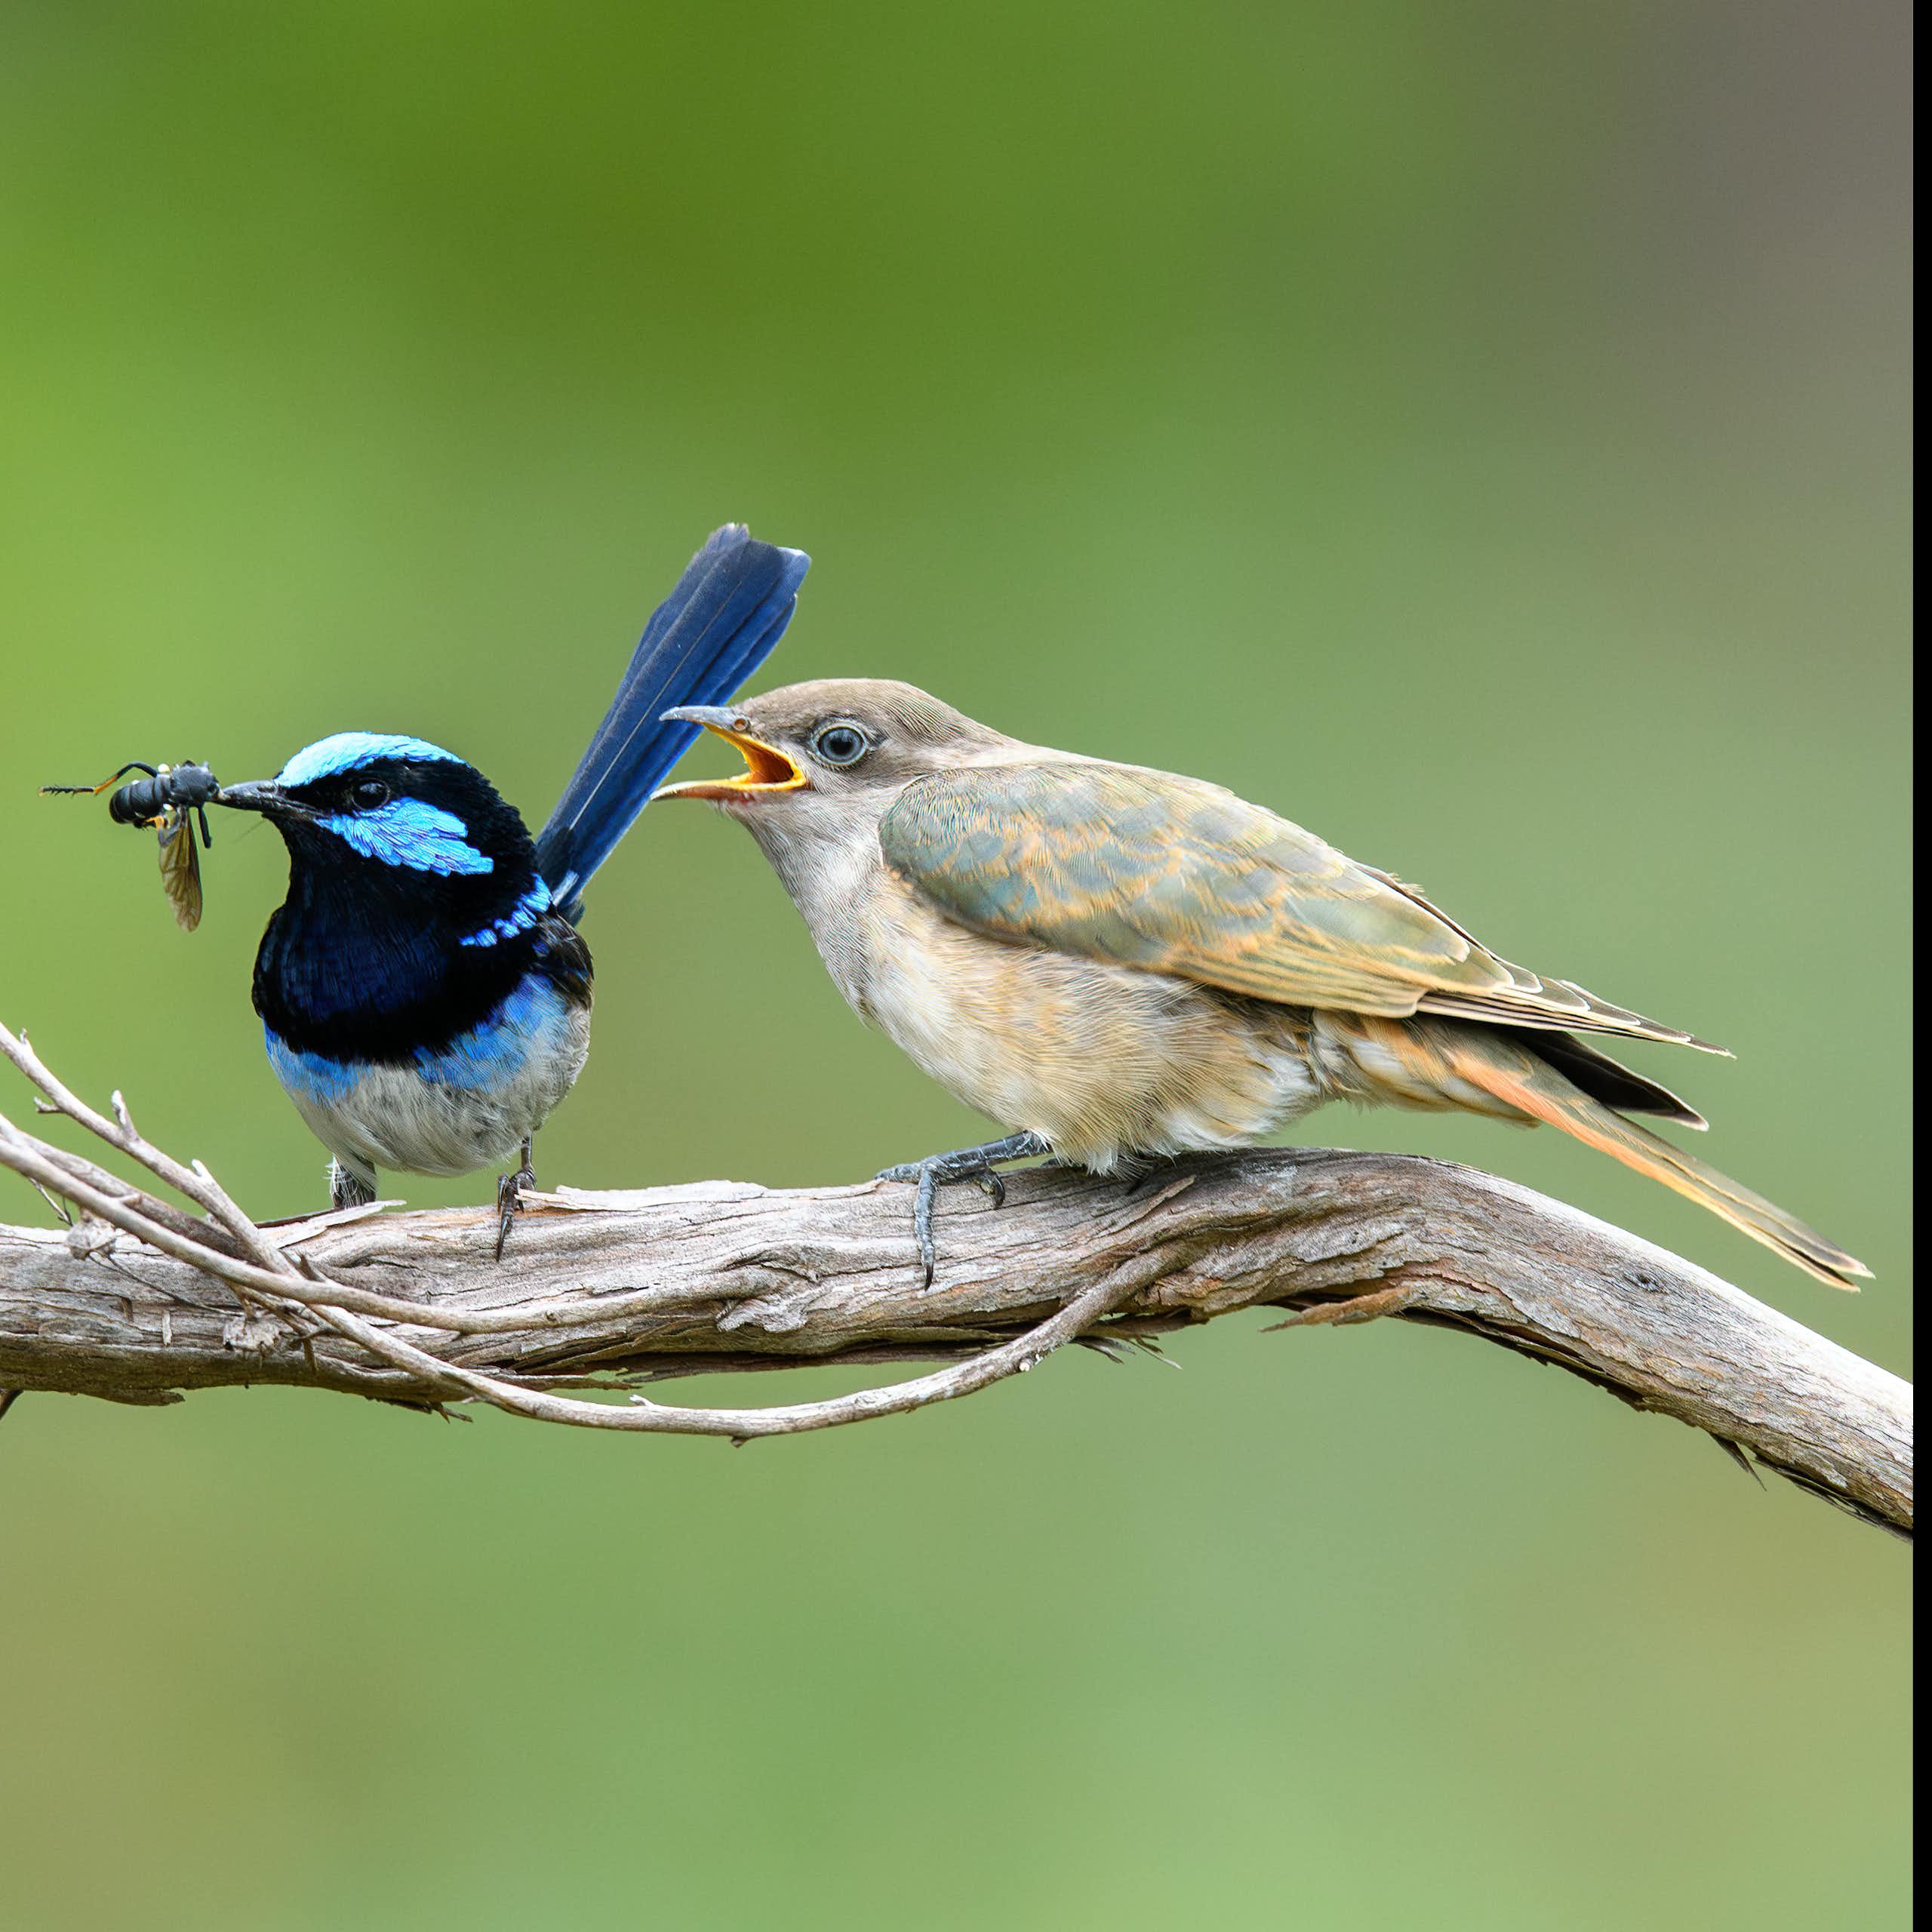 A photo of a small blue bird about to feed a bug to a larger brownish bird.